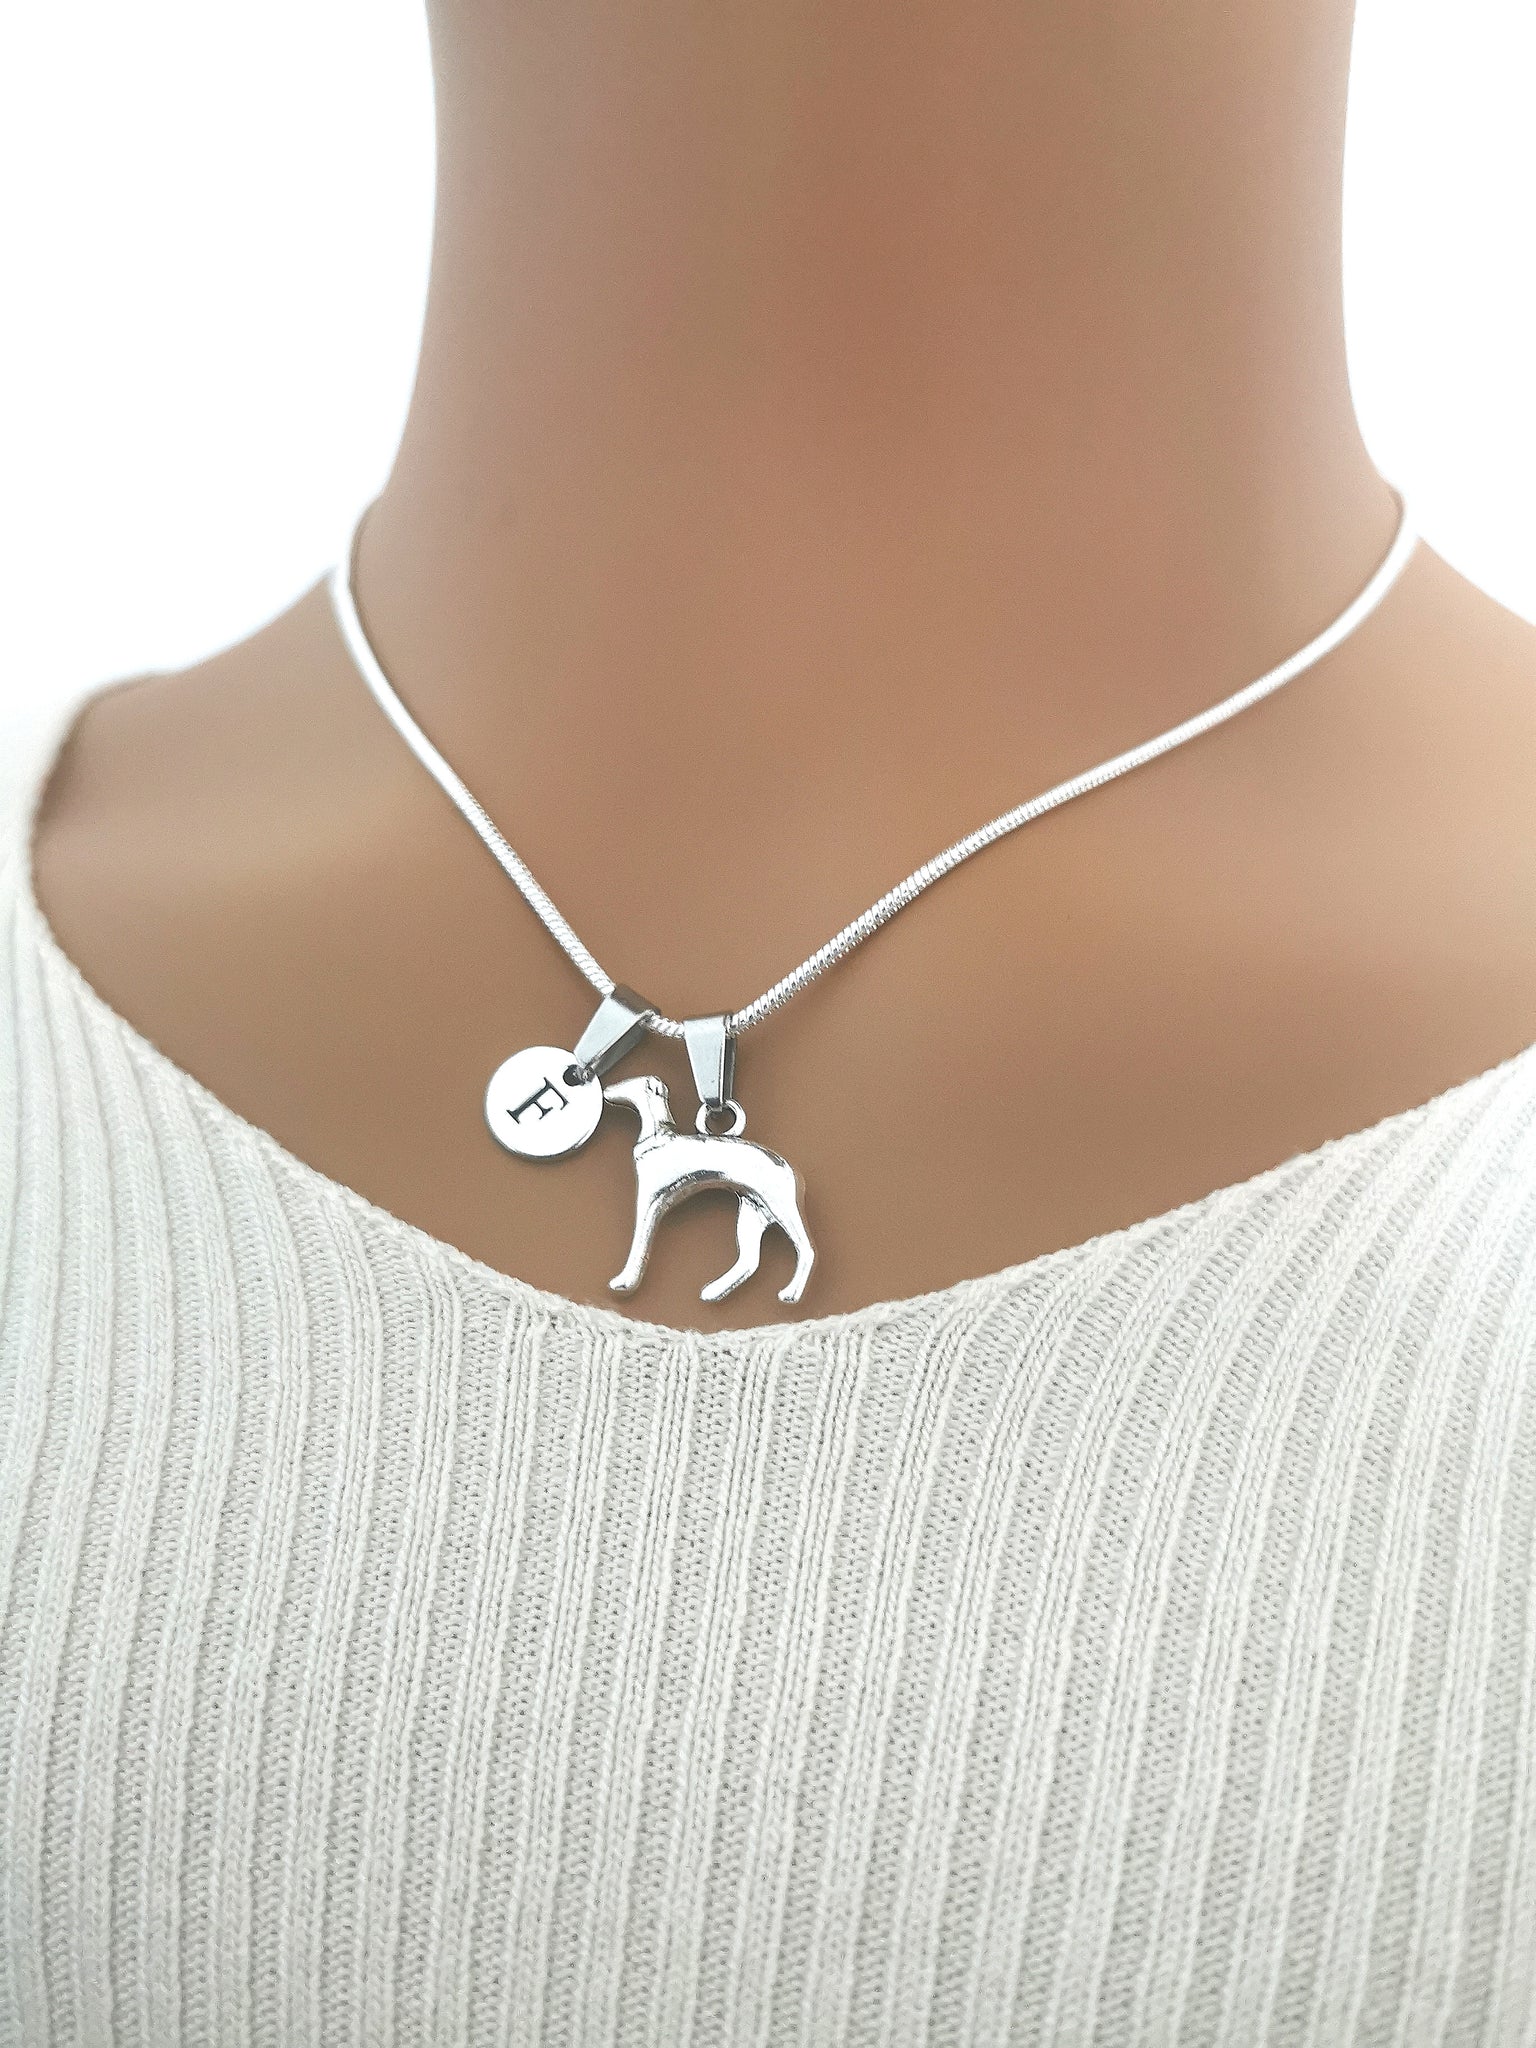 Capture elegance with our Silver Greyhound Necklace - a refined Dog Charm Gift with an 18" length, perfect for dog enthusiasts - YouLoveYouShop